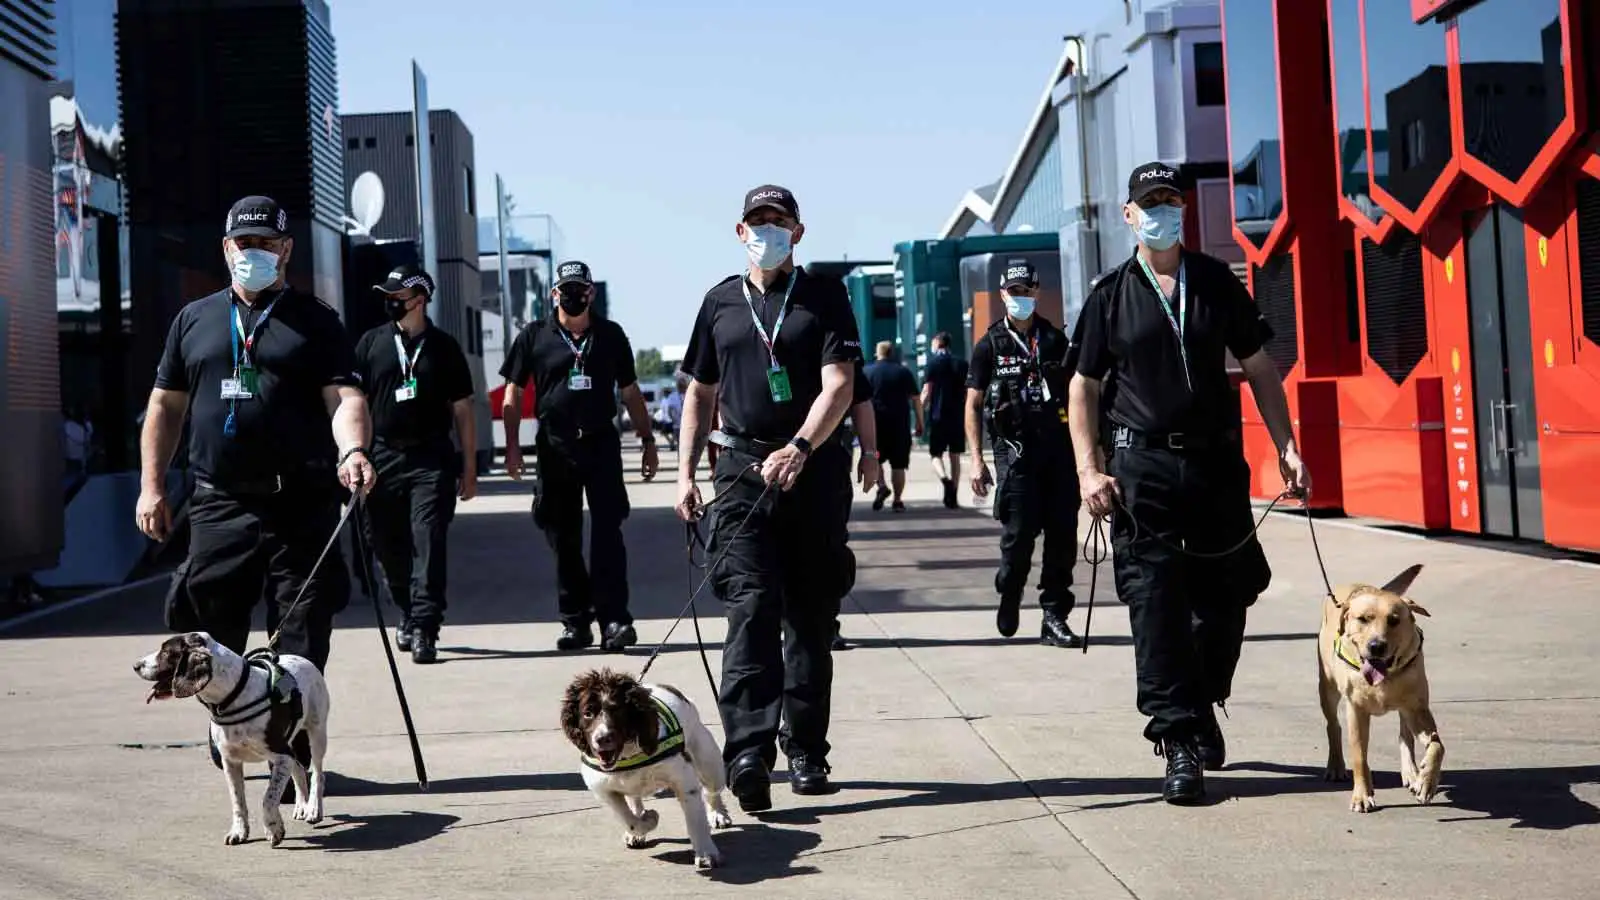 Police and dogs patrol the paddock. British GP Silverstone July 2021.